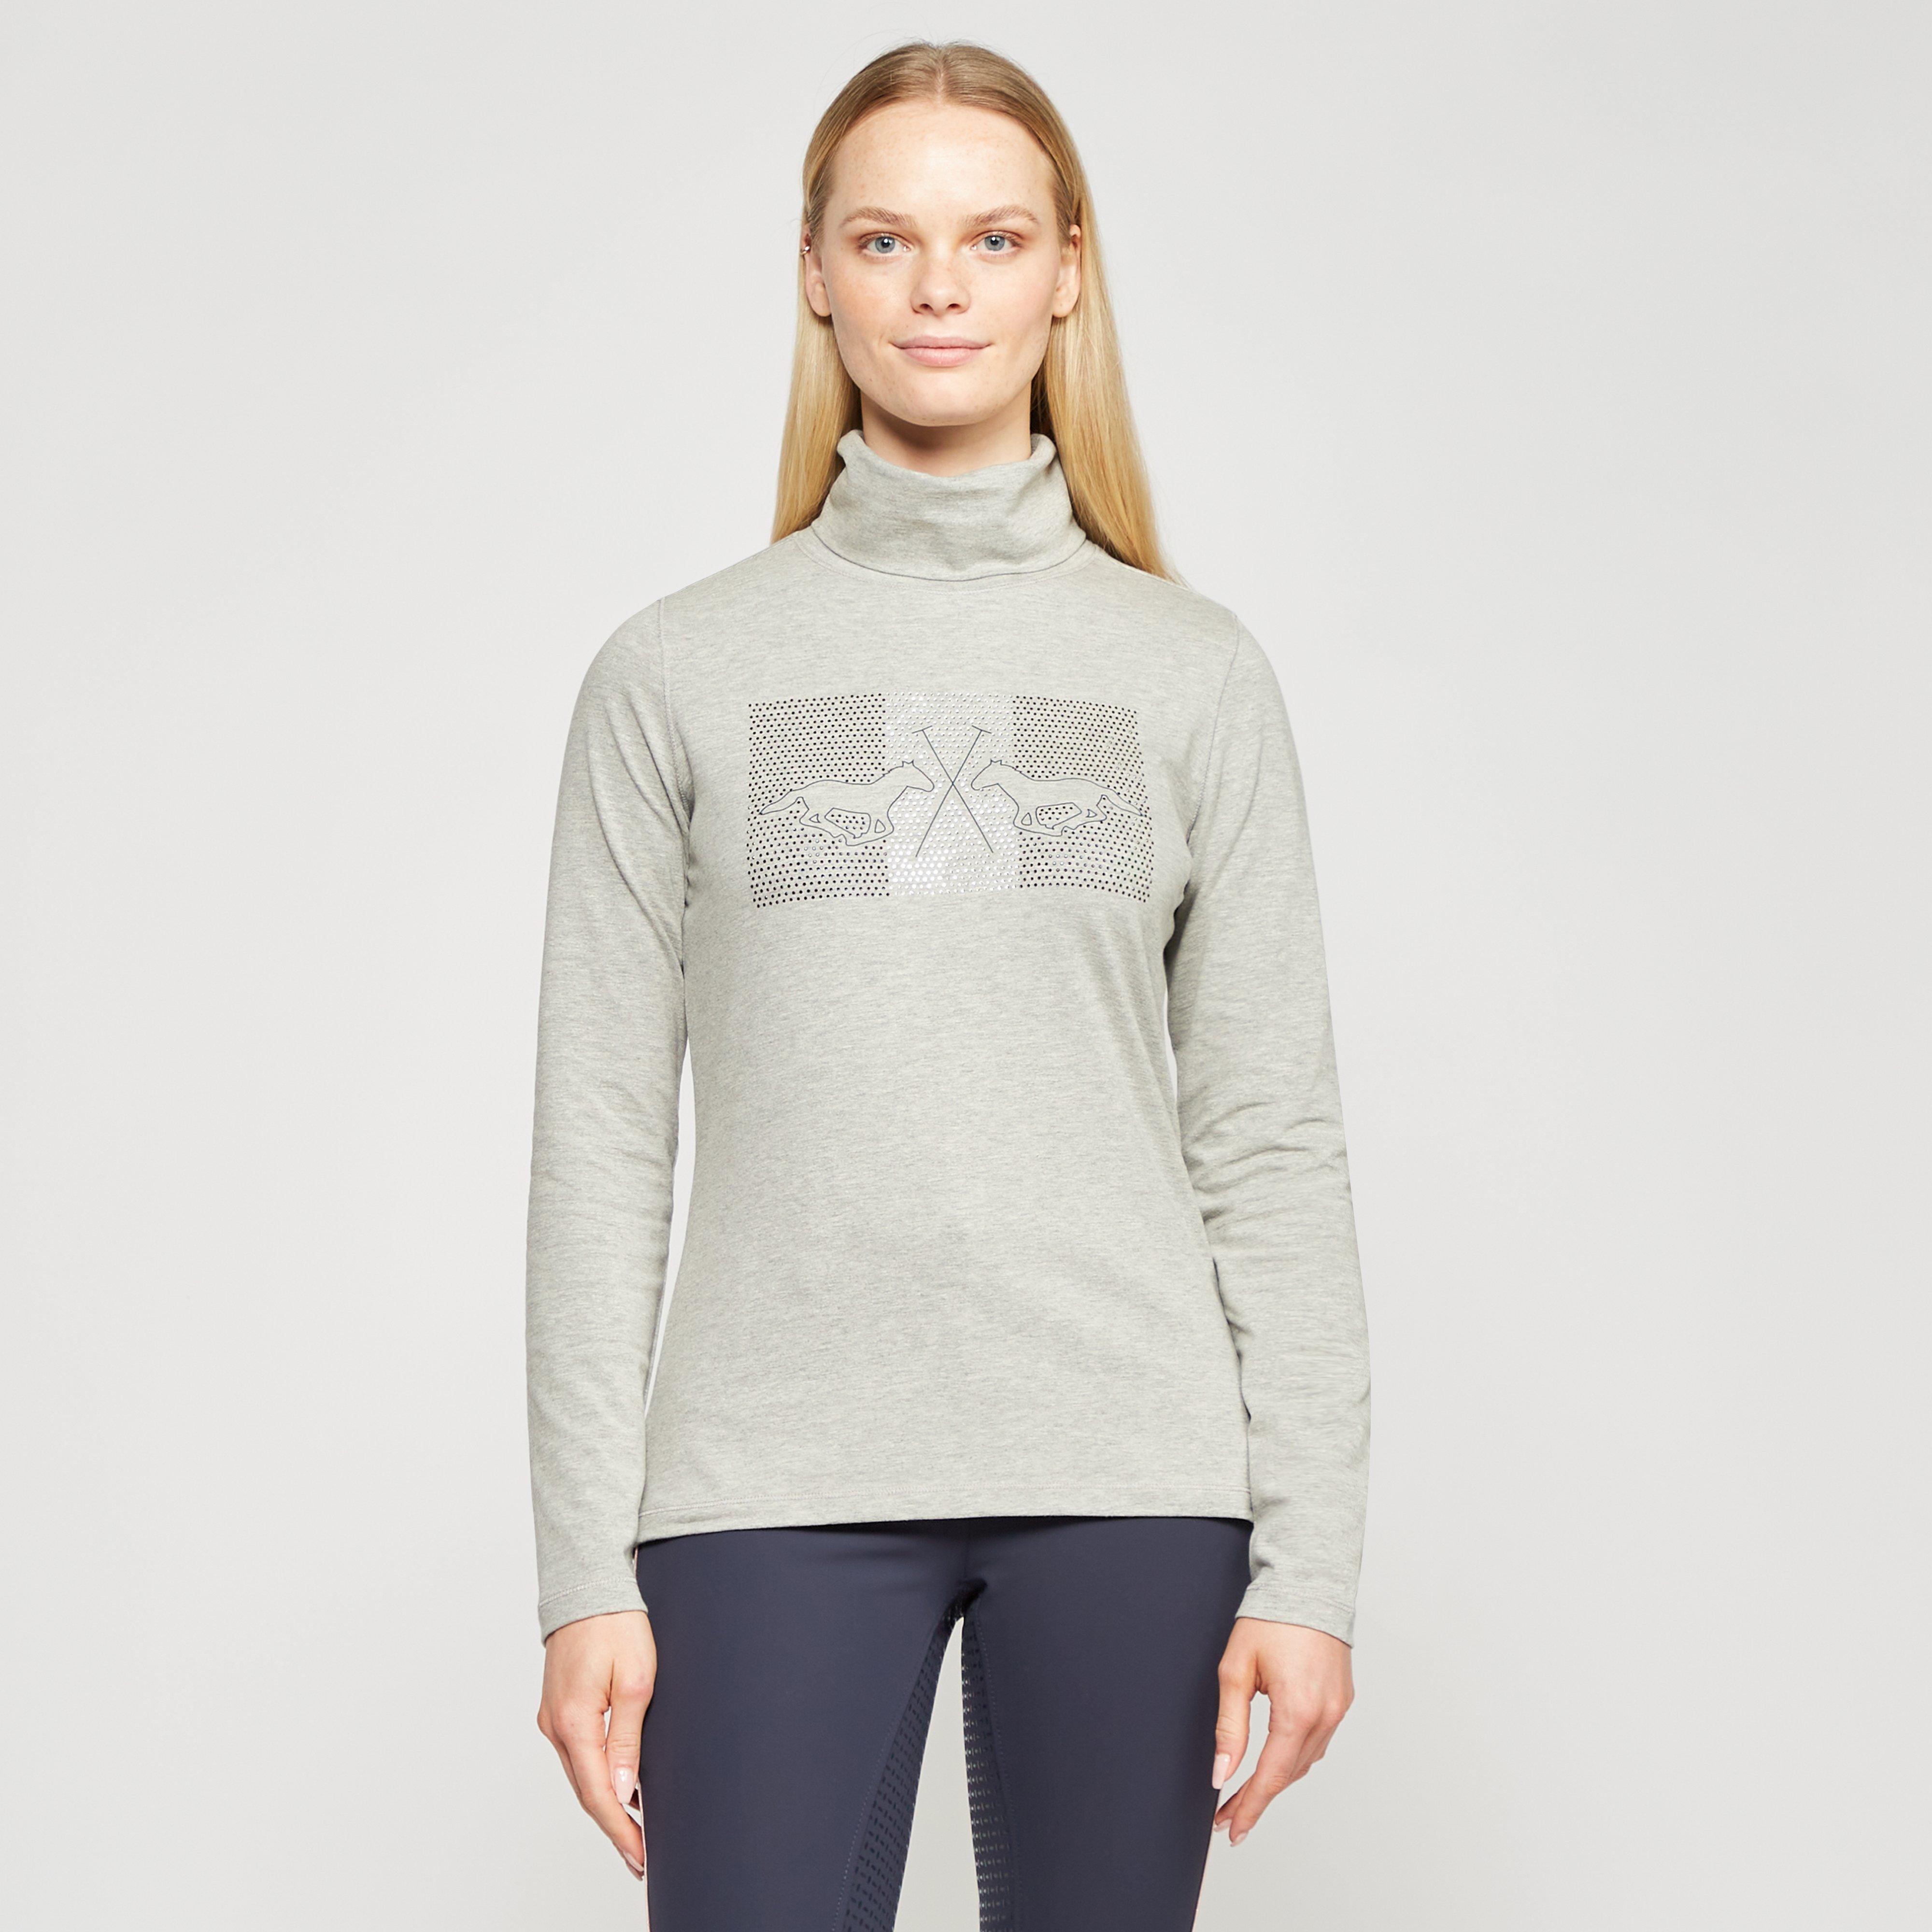  HV Polo Ladies Cecile Long Sleeve Top Grey Heather